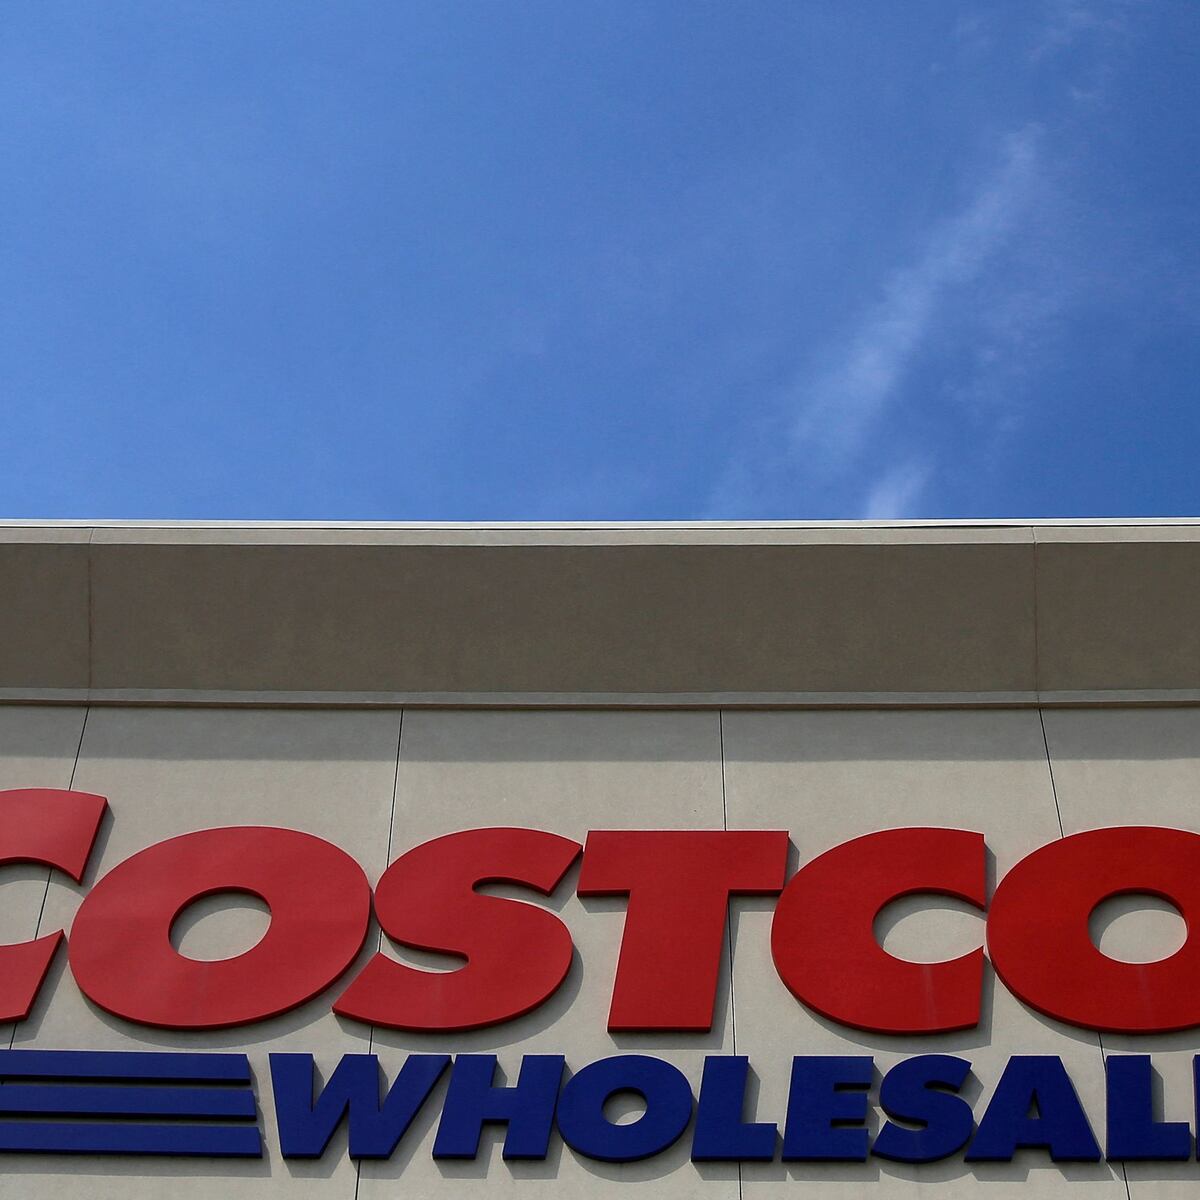 Why hasn't the price of Costco's $1.50 hot dog and soda combo